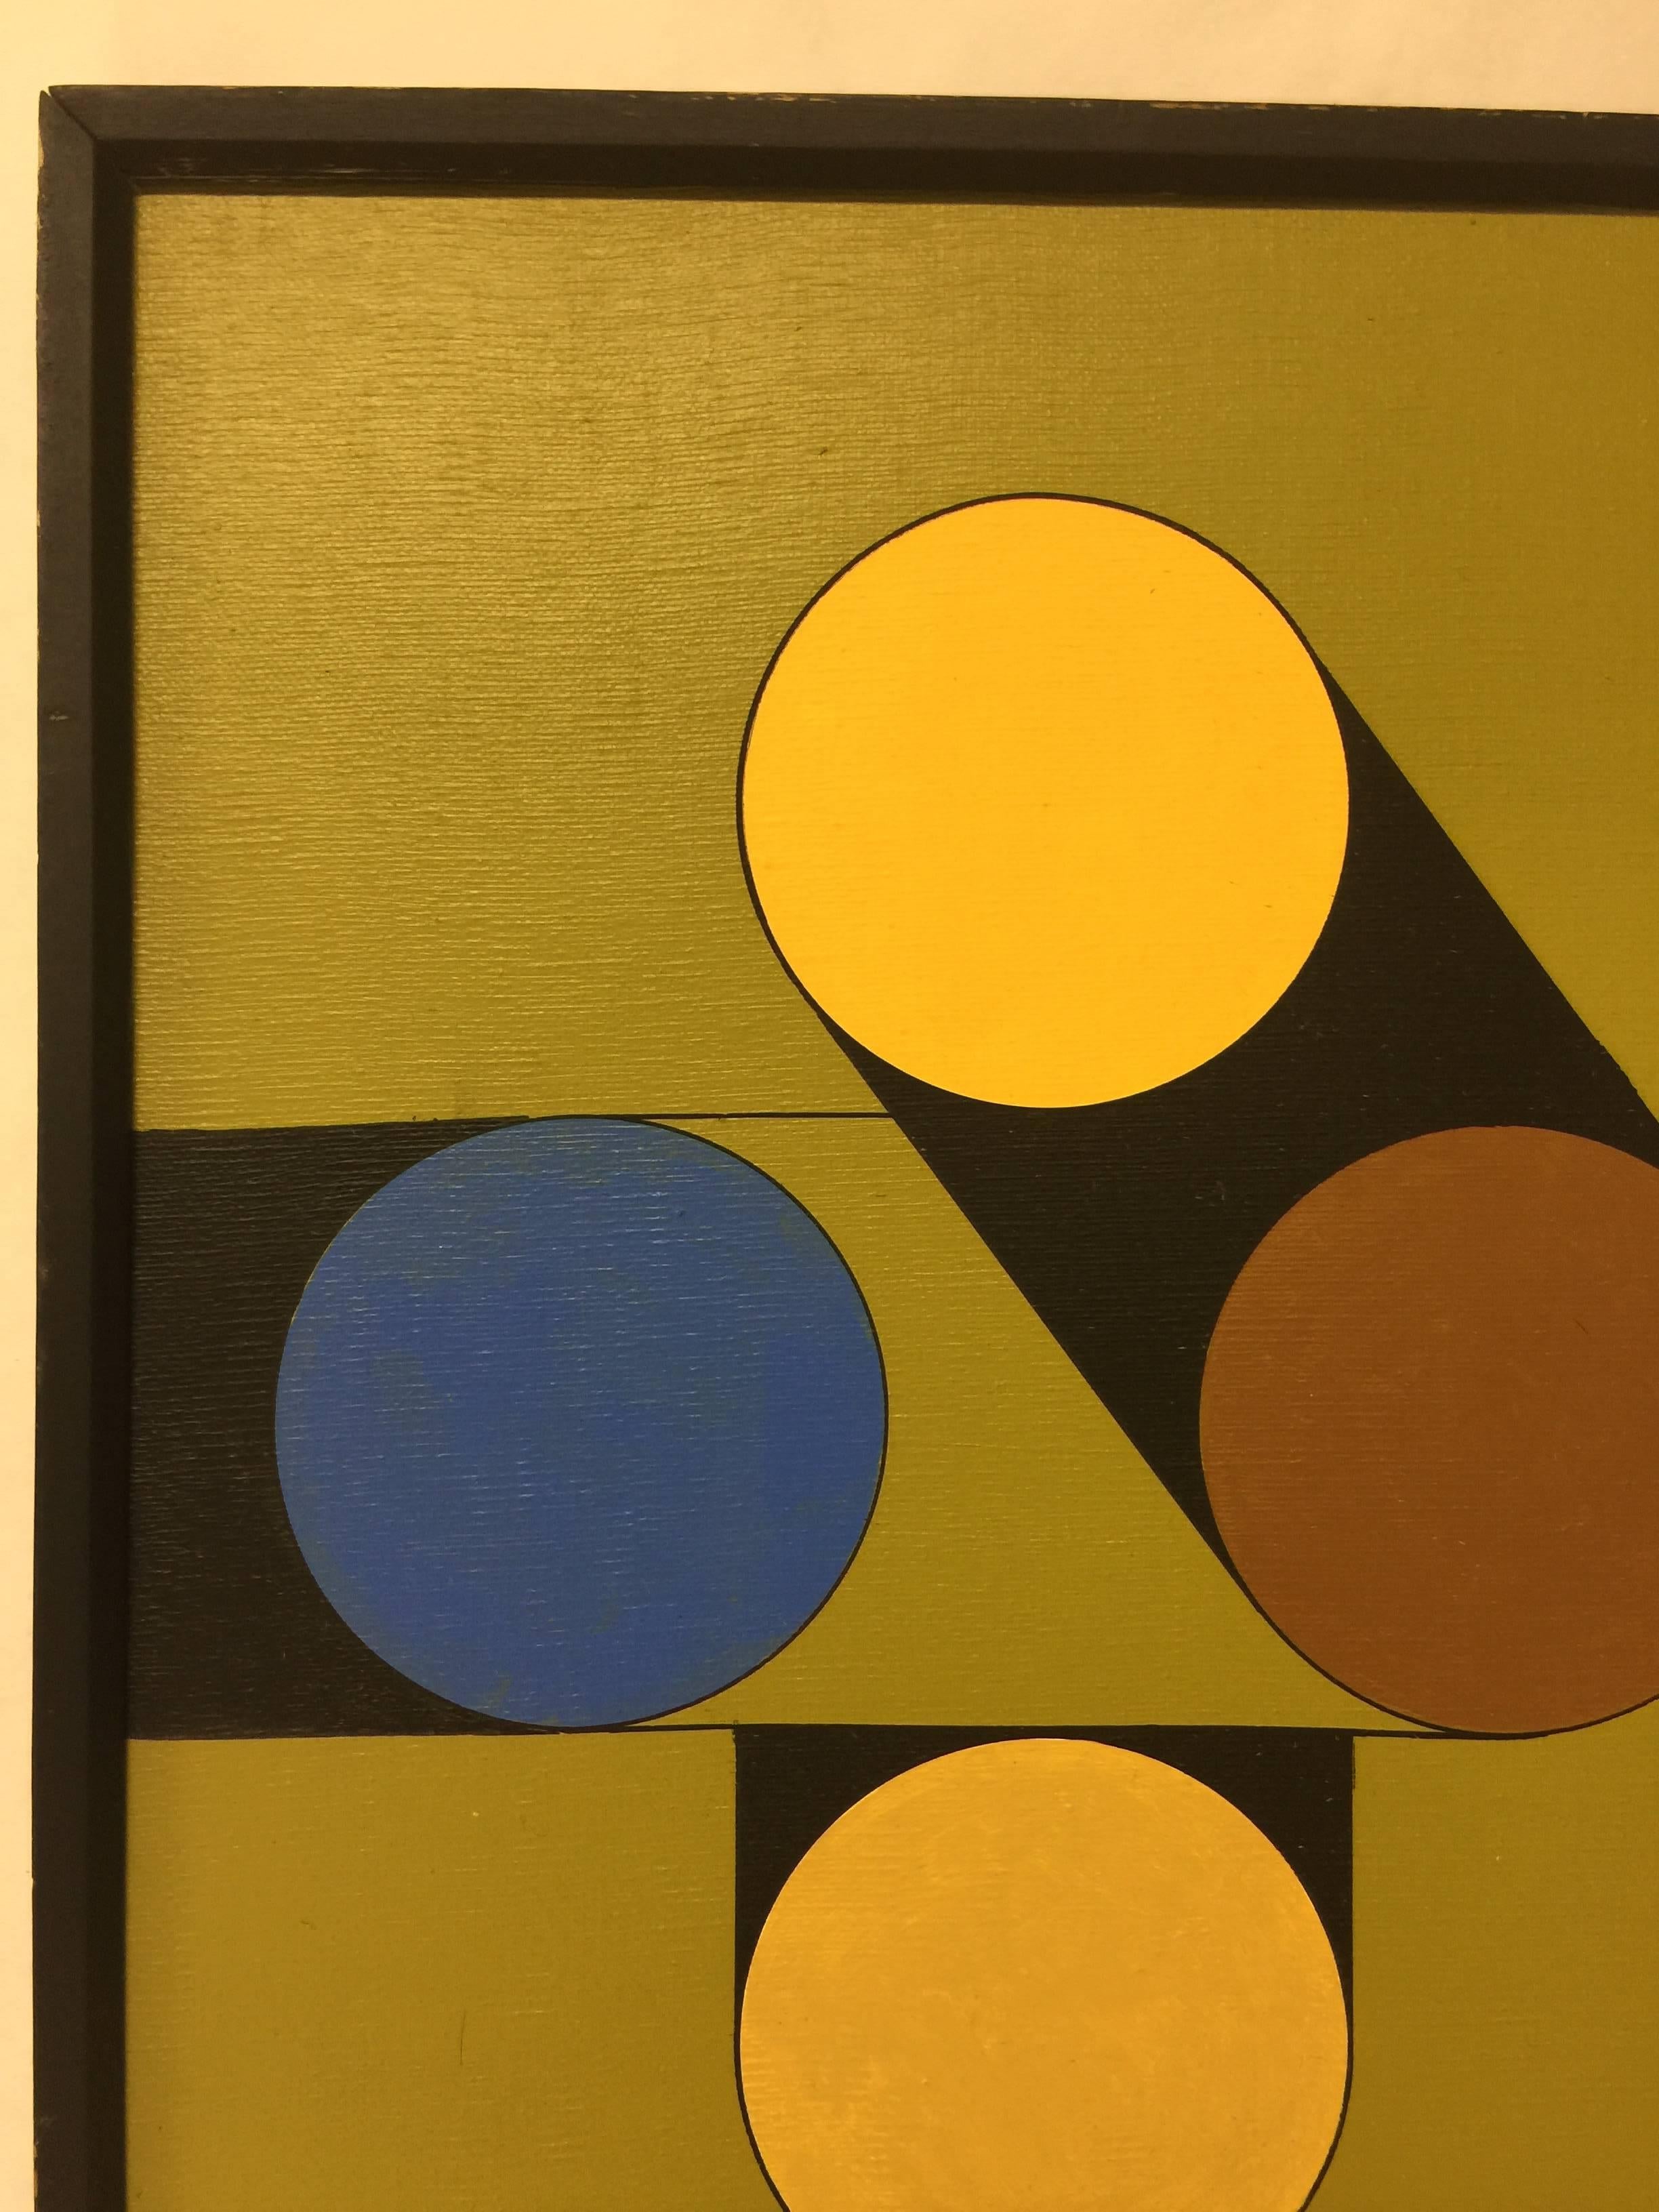 American Vintage circa 1980s Hard Edge Geometric Abstract Oil on Canvas Painting 1 of 5